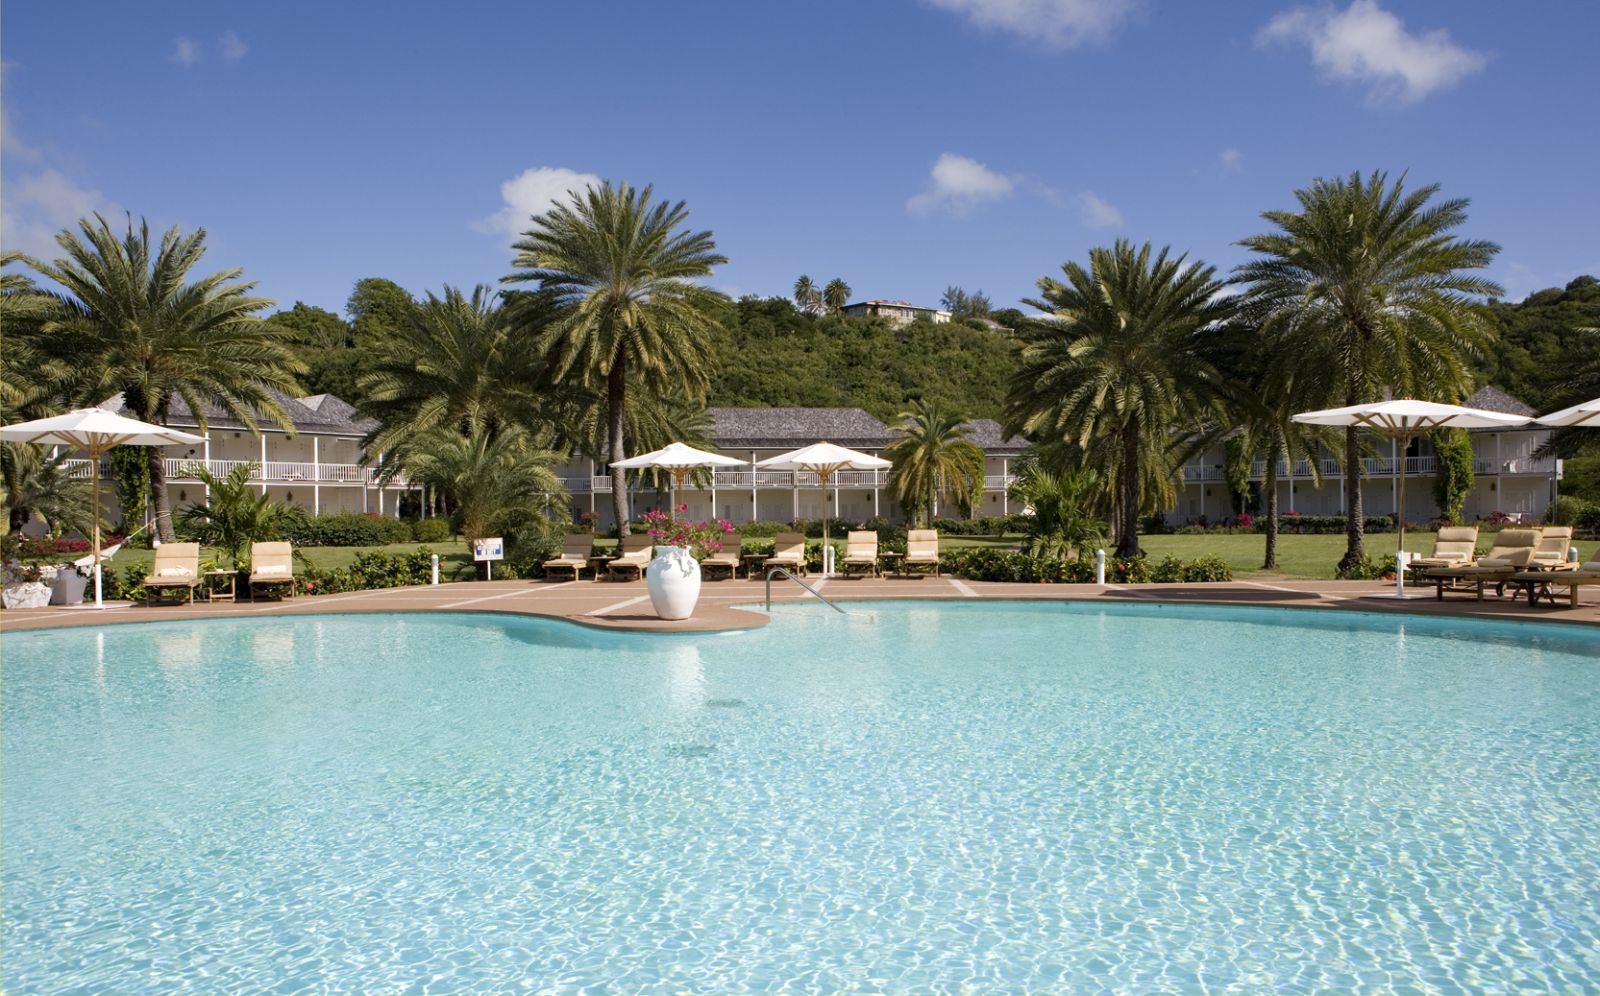 Swimming pool at the Inn at English Harbour Antigua